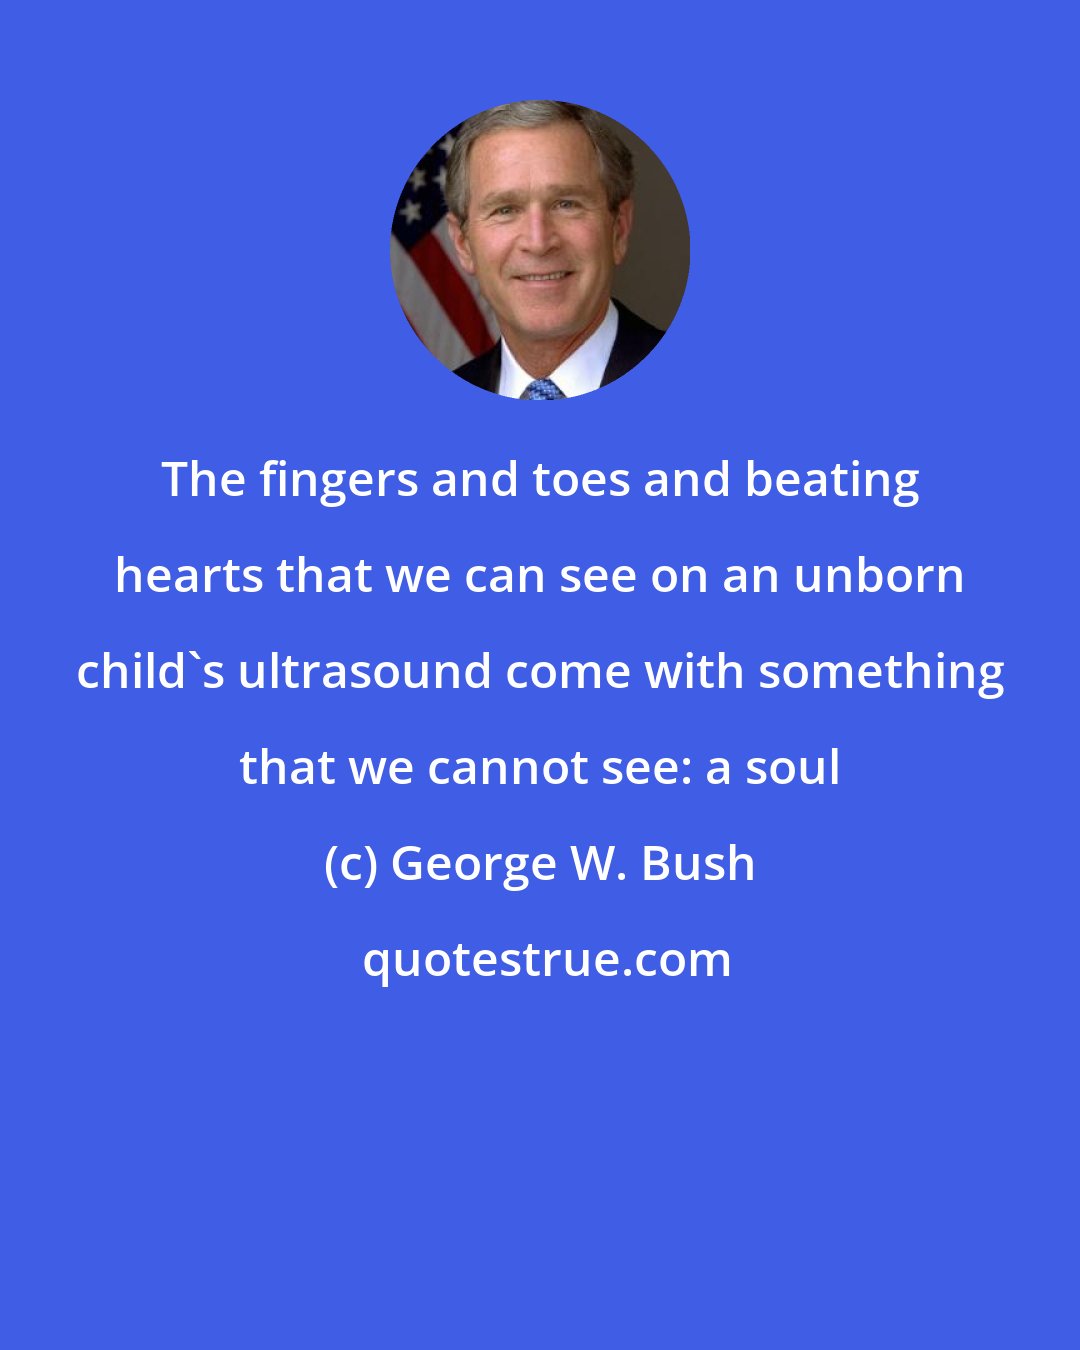 George W. Bush: The fingers and toes and beating hearts that we can see on an unborn child's ultrasound come with something that we cannot see: a soul